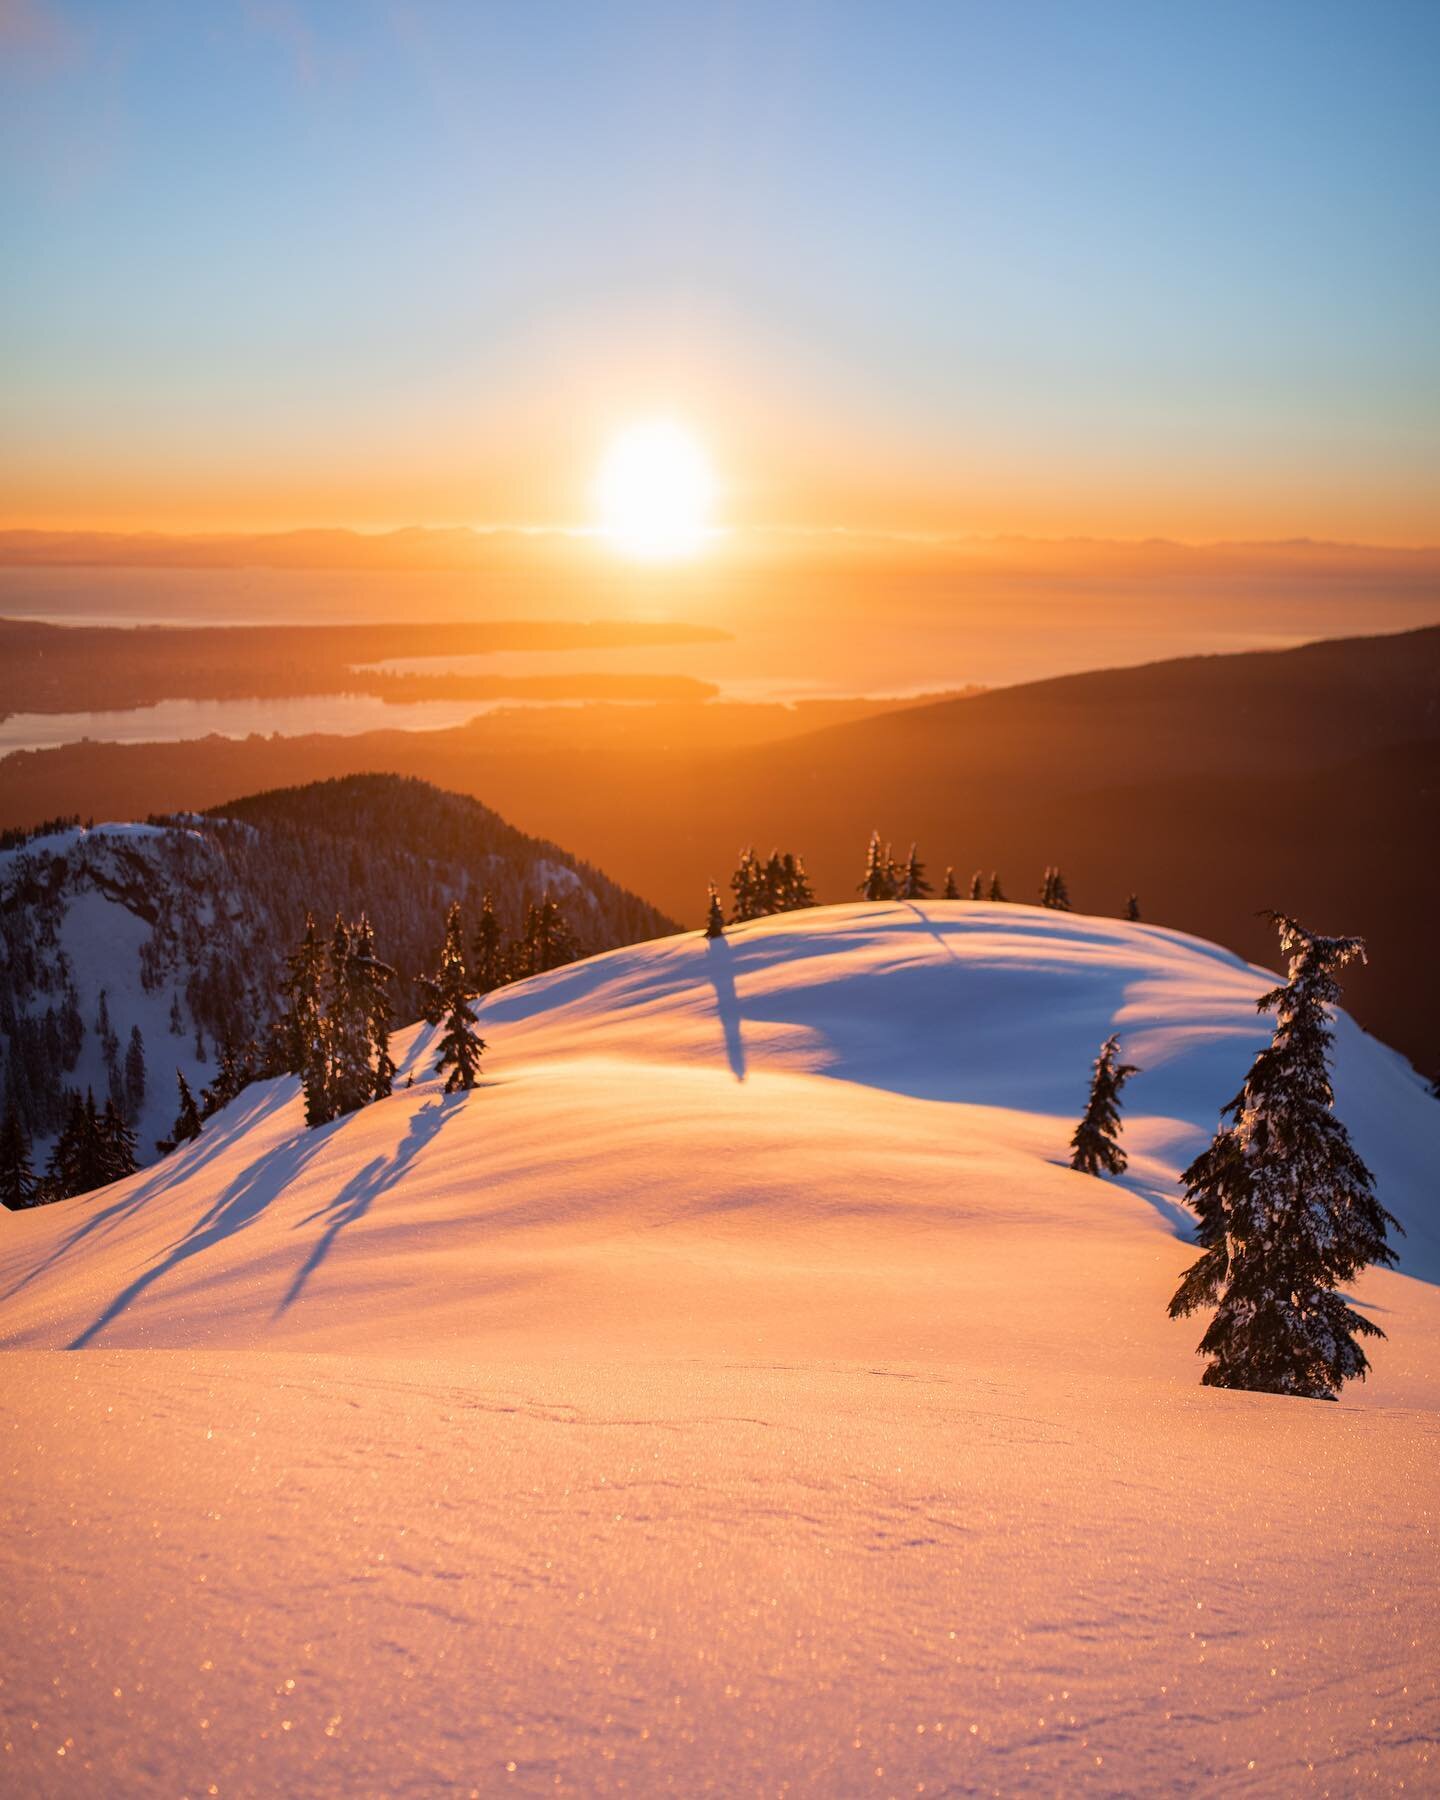 Been enjoying the sunsets over Vancouver lately. We&rsquo;ve had a mix of clear skies and massive cloud inversions covering the whole city. Here&rsquo;s from a clear day at the top of Mount Seymour.